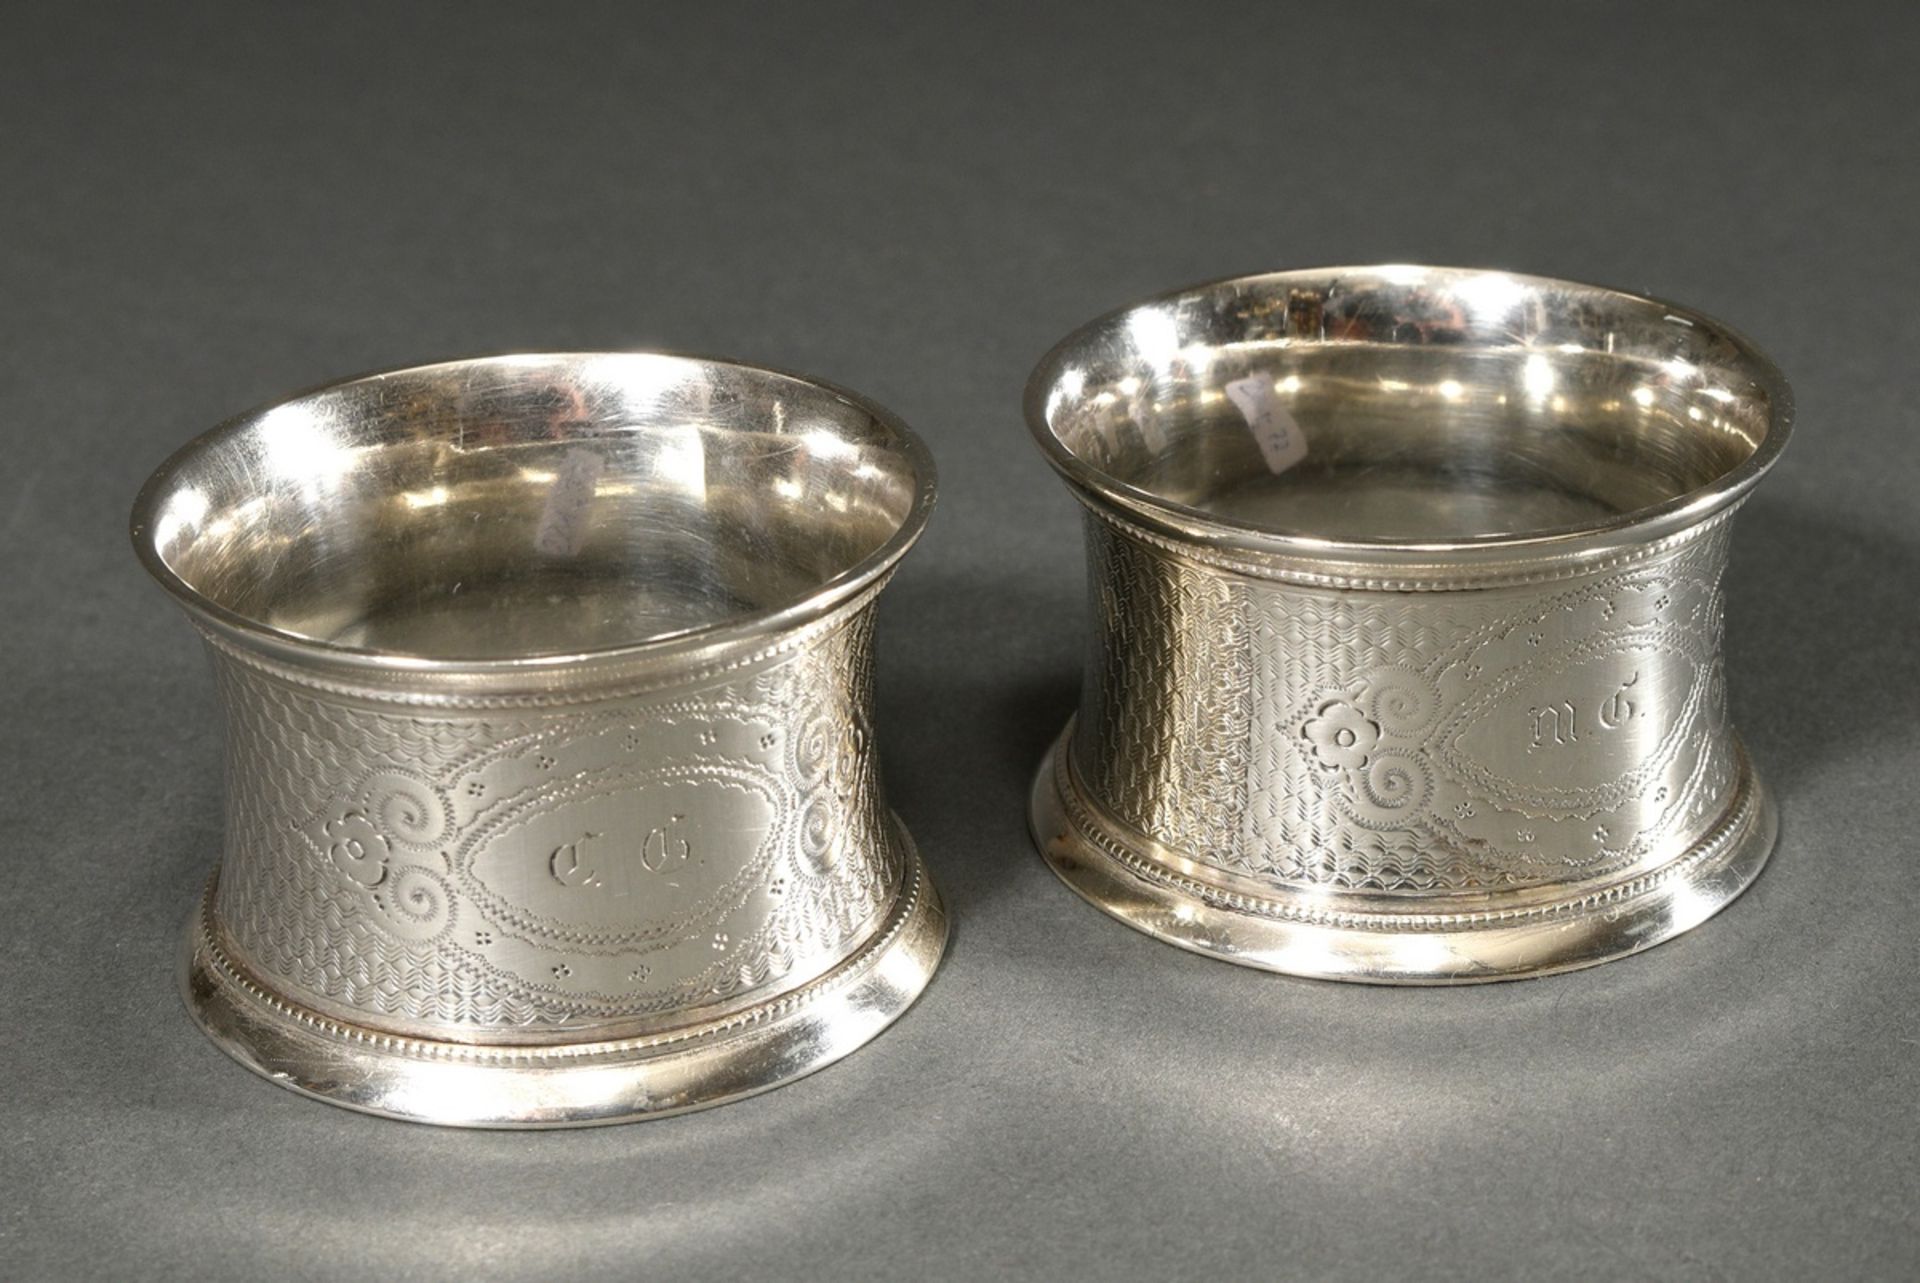 2 Guilloché napkin rings with Fraktur script monograms ‘CG/MG’, German, late 19th century, silver 1